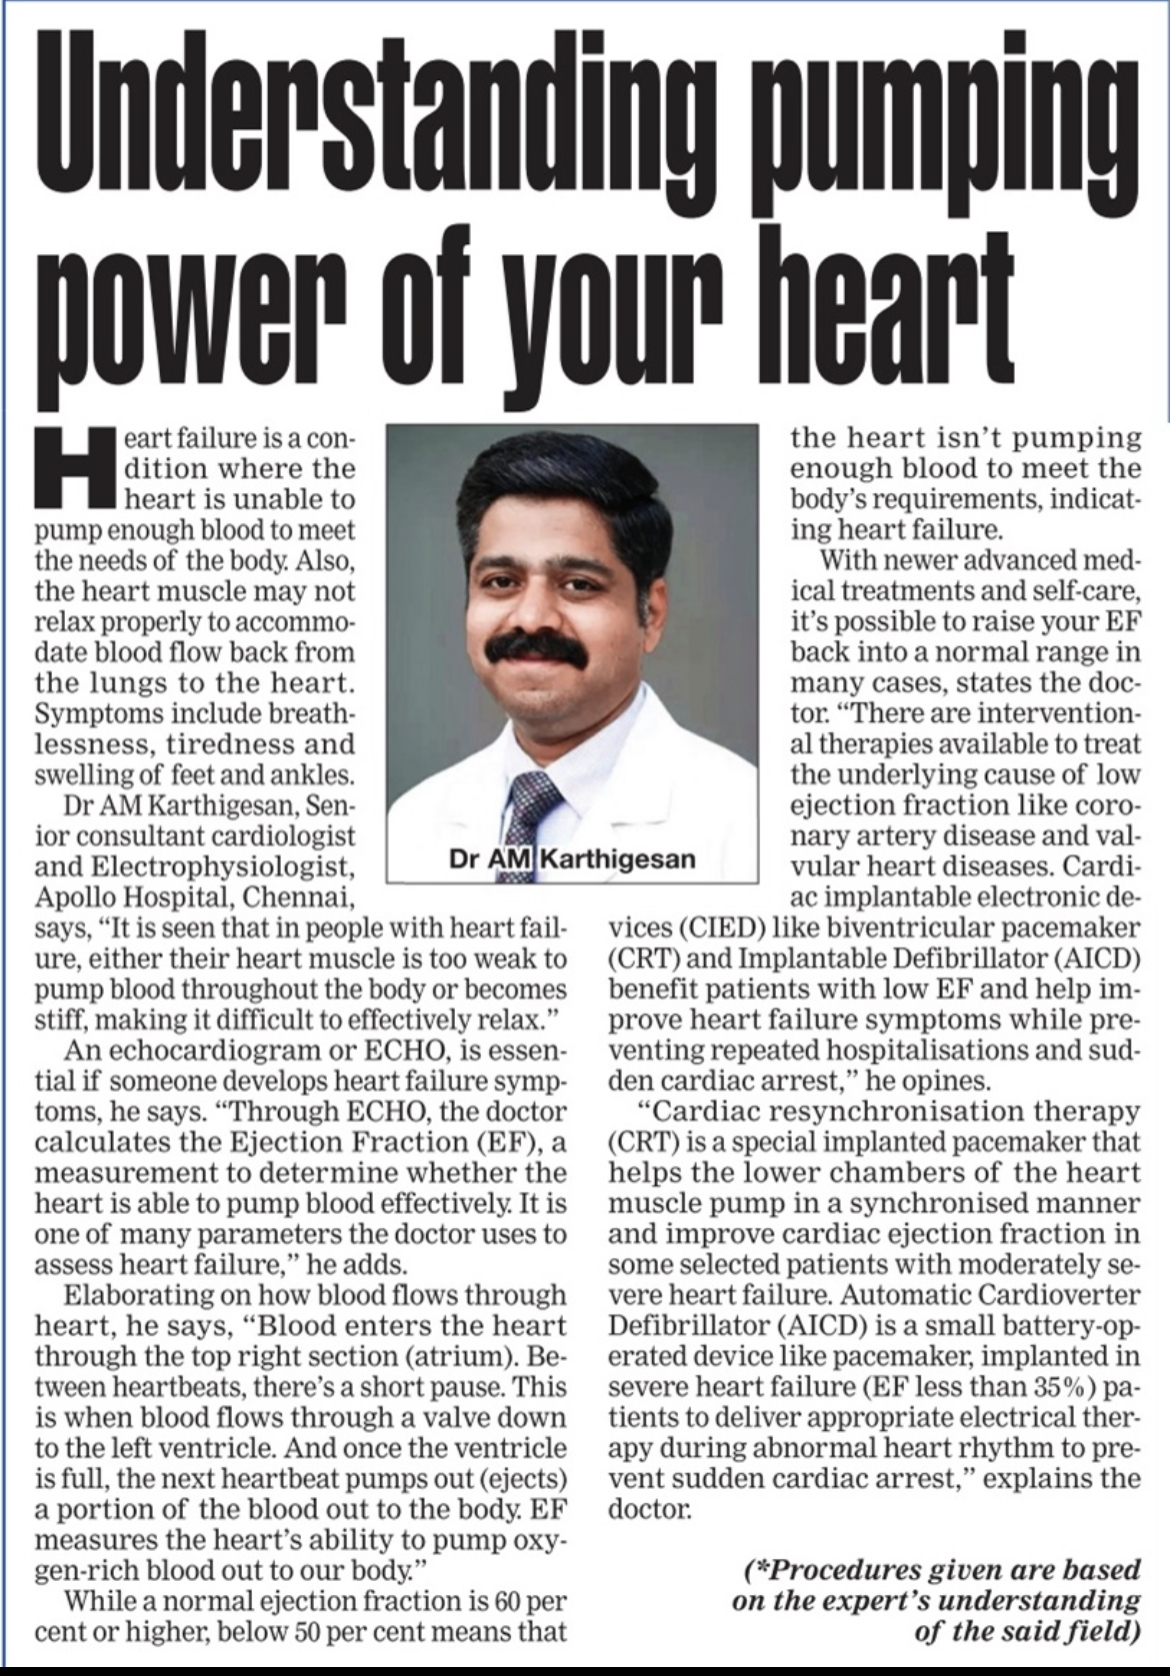 Image of news article about 'Understanding pumping power of your heart' by Dr. Karthigesan.